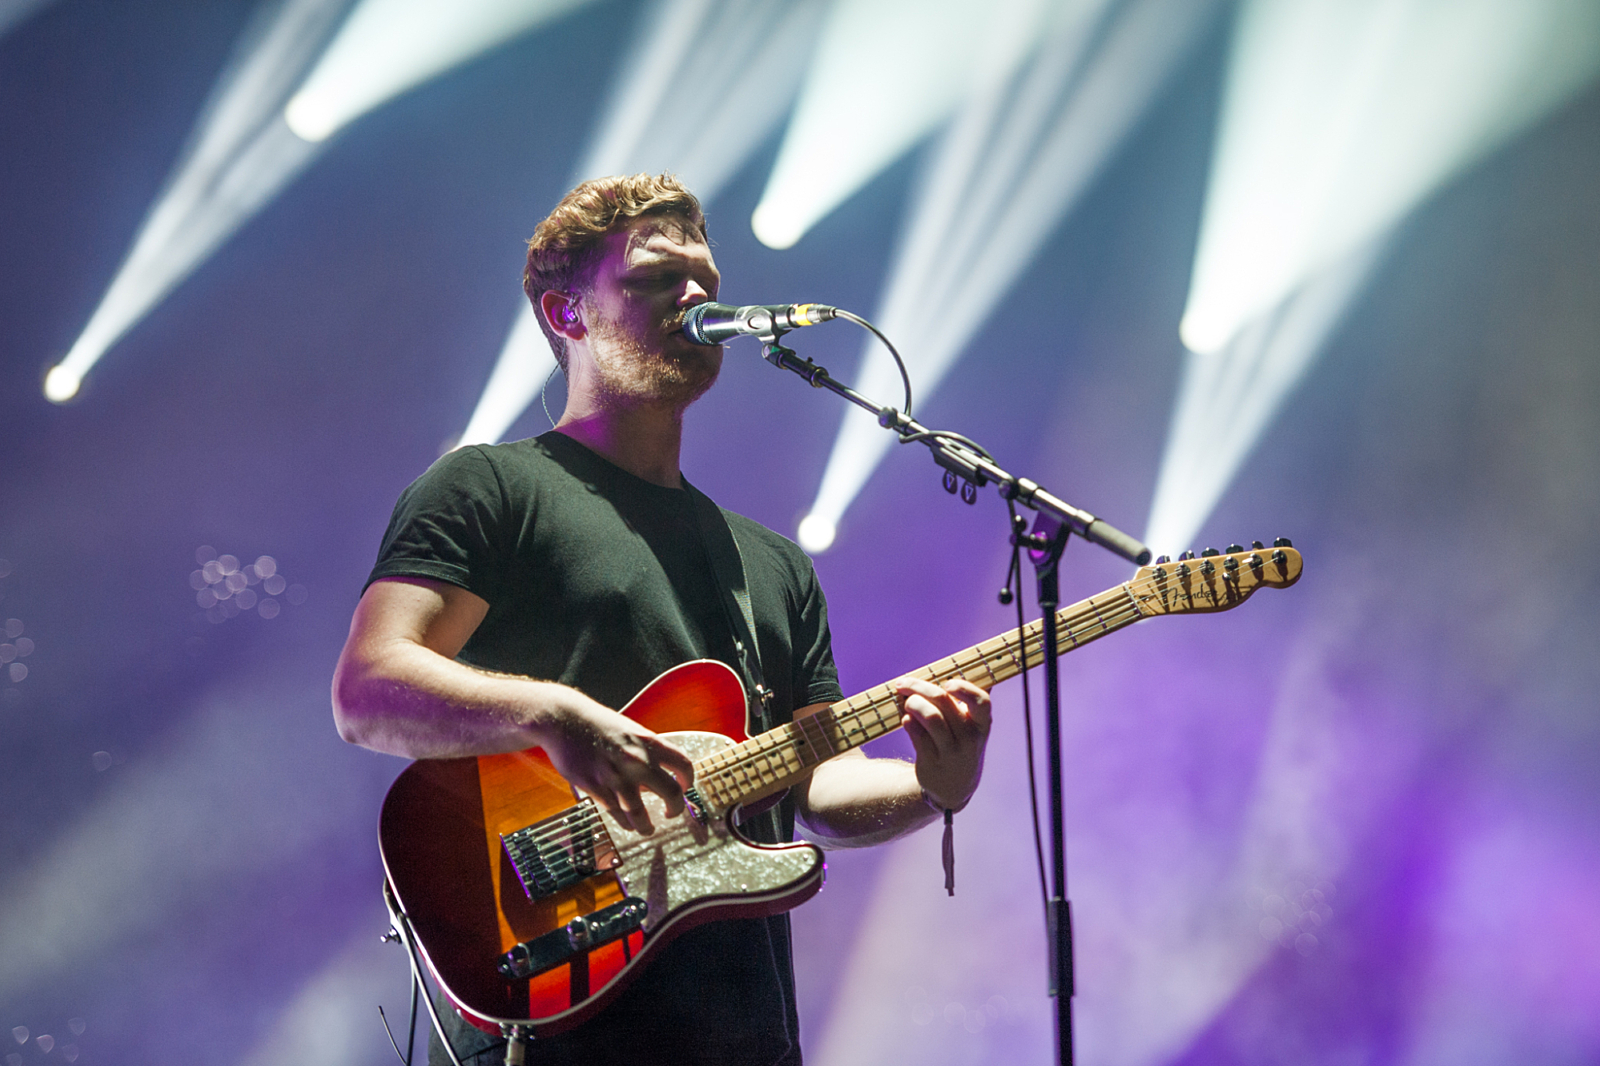 Alt-J steal the show on the second night of Bilbao BBK Live